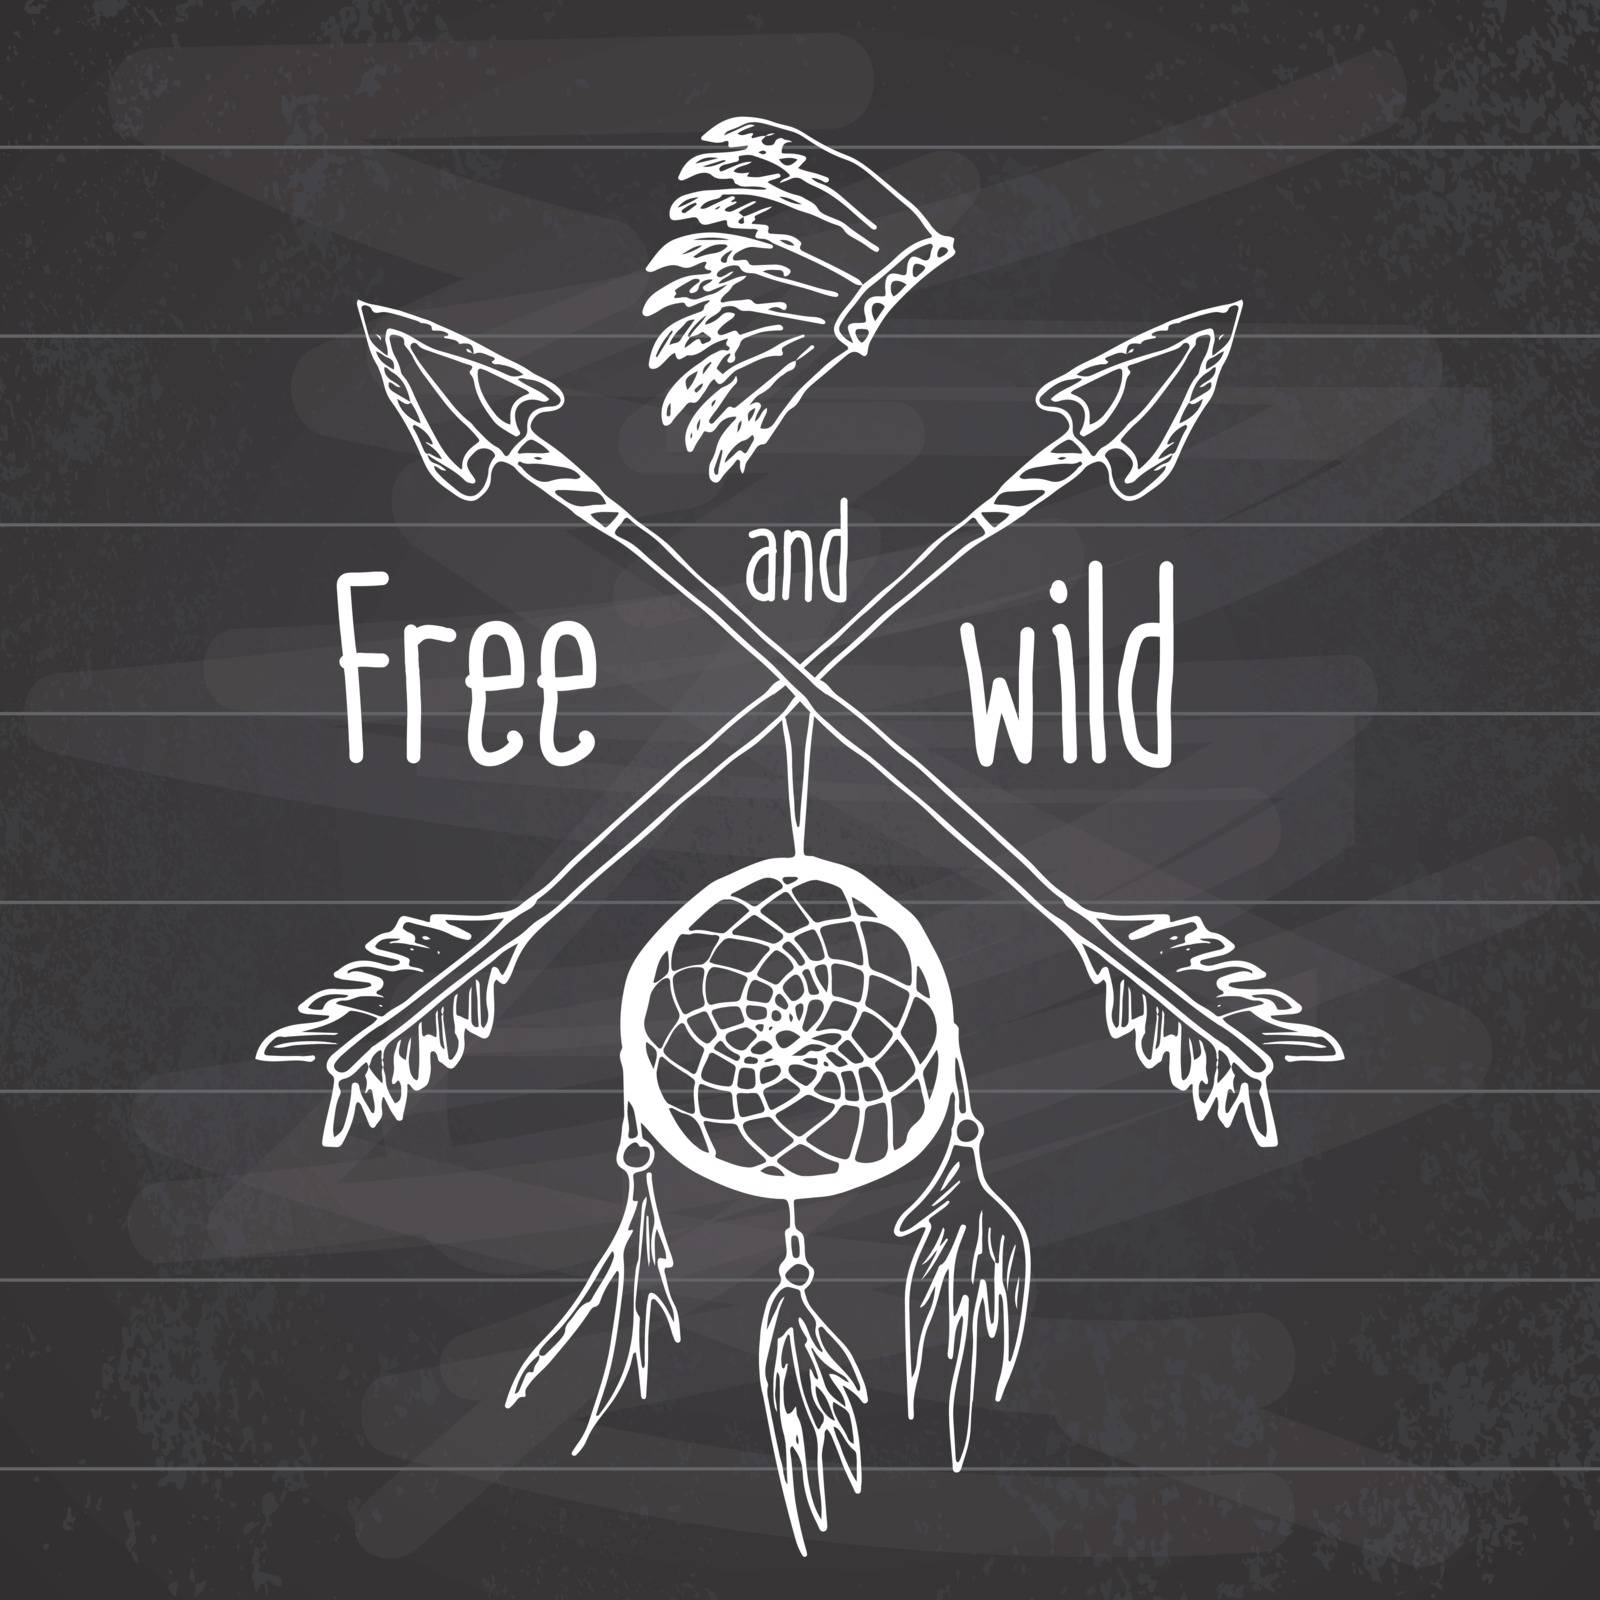 Dream catcher and crossed arrows, tribal legend in Indian style with traditional headgeer. dreamcatcher with bird feathers and beads. Vector vintage illustration, Letters Free and Wild. by Lemon_workshop